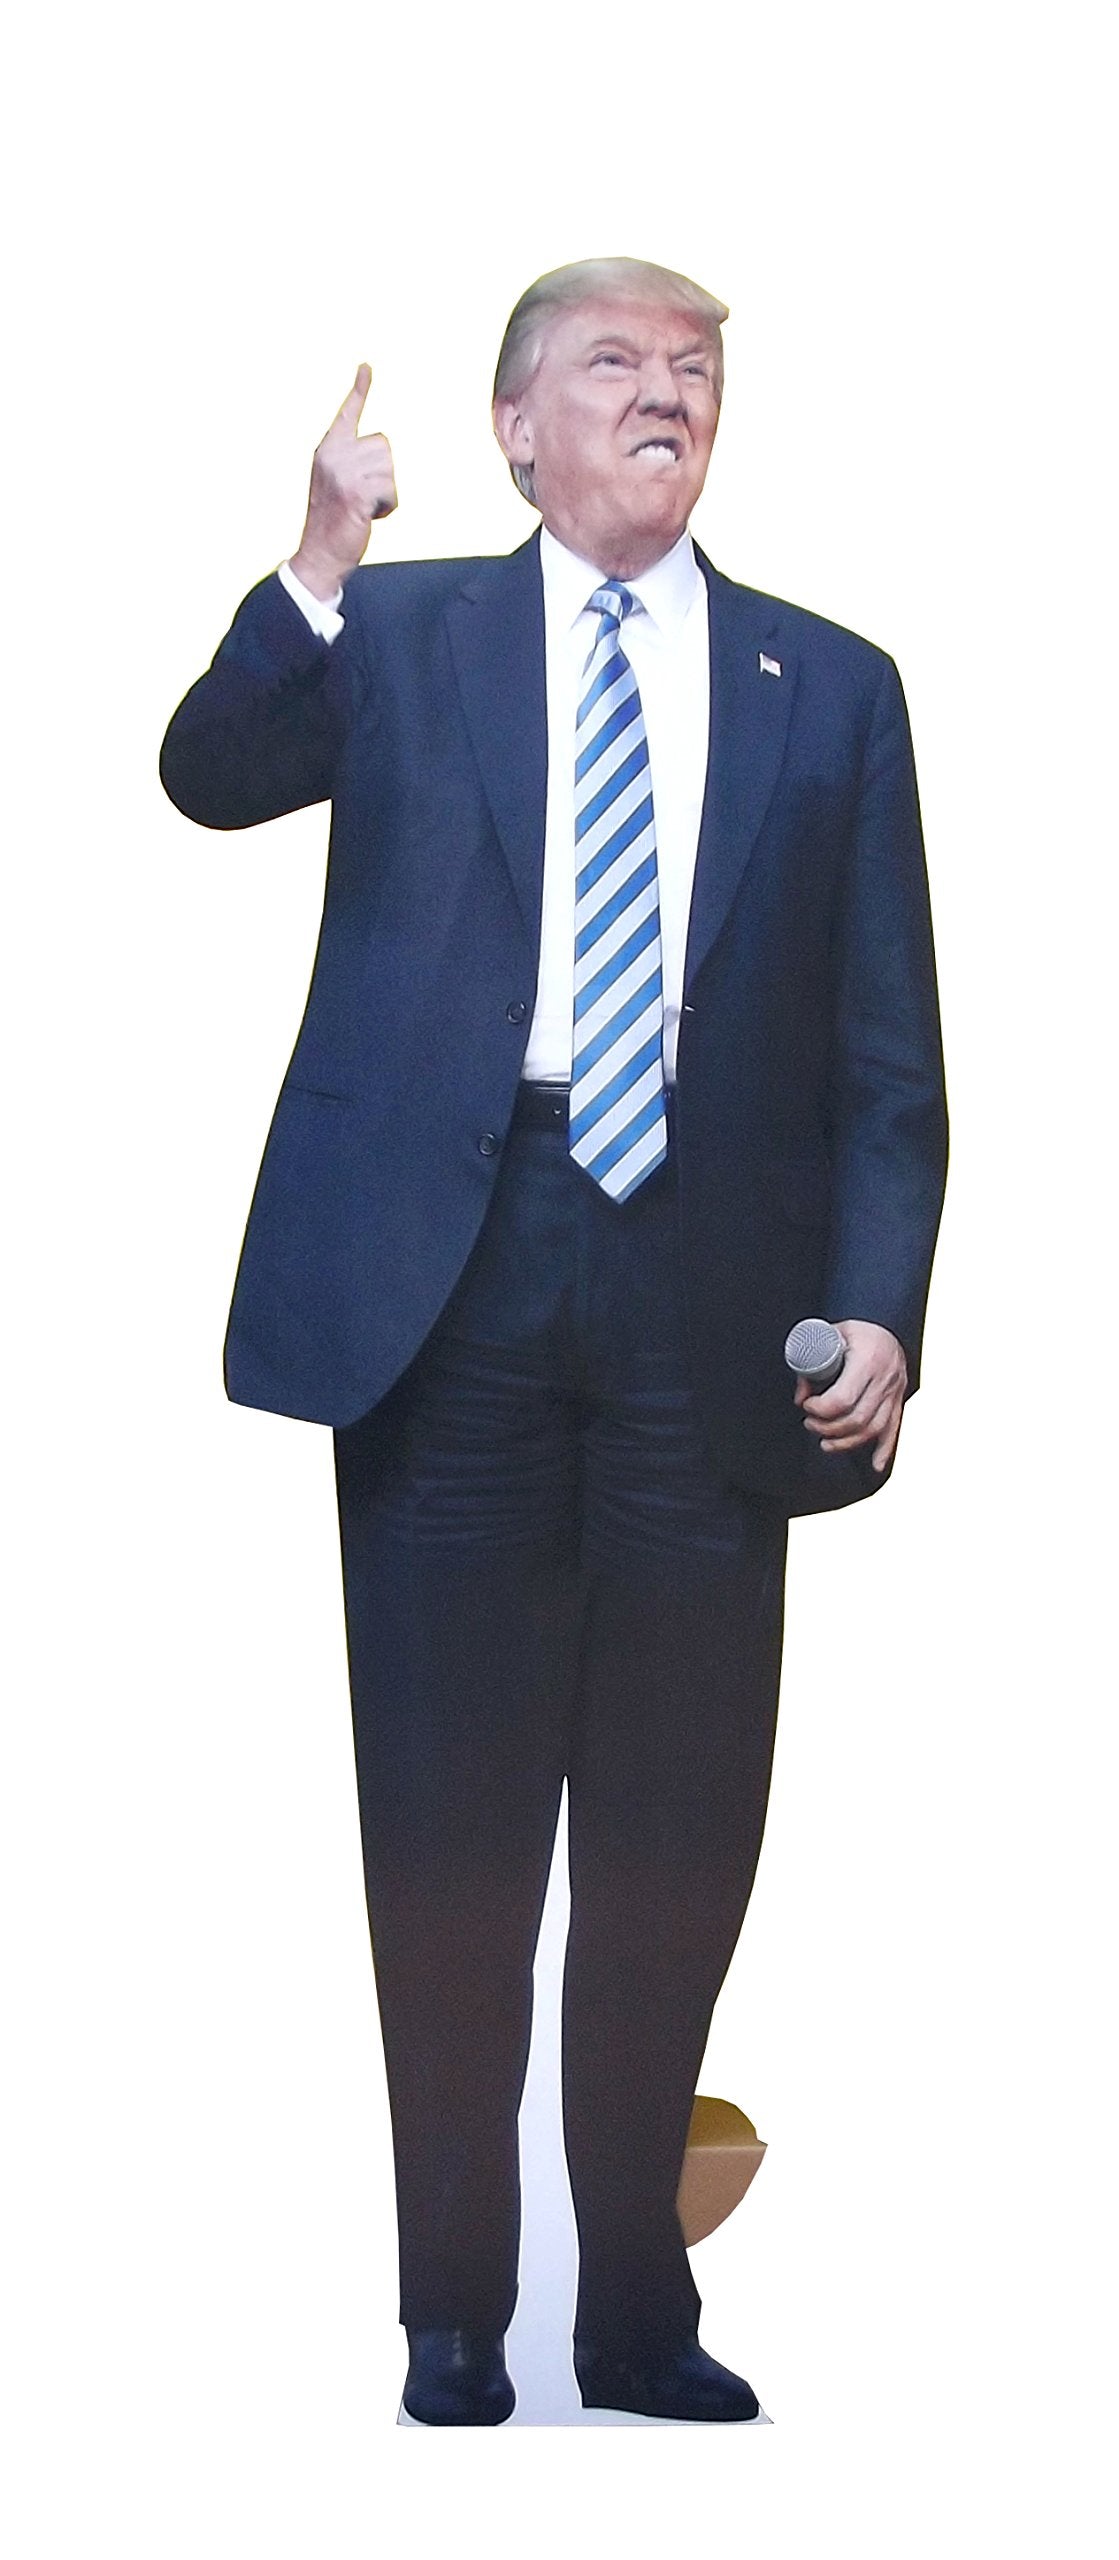 Aahs Engraving Furious Donald Trump Life Size Cardboard Stand Up, 6 feet